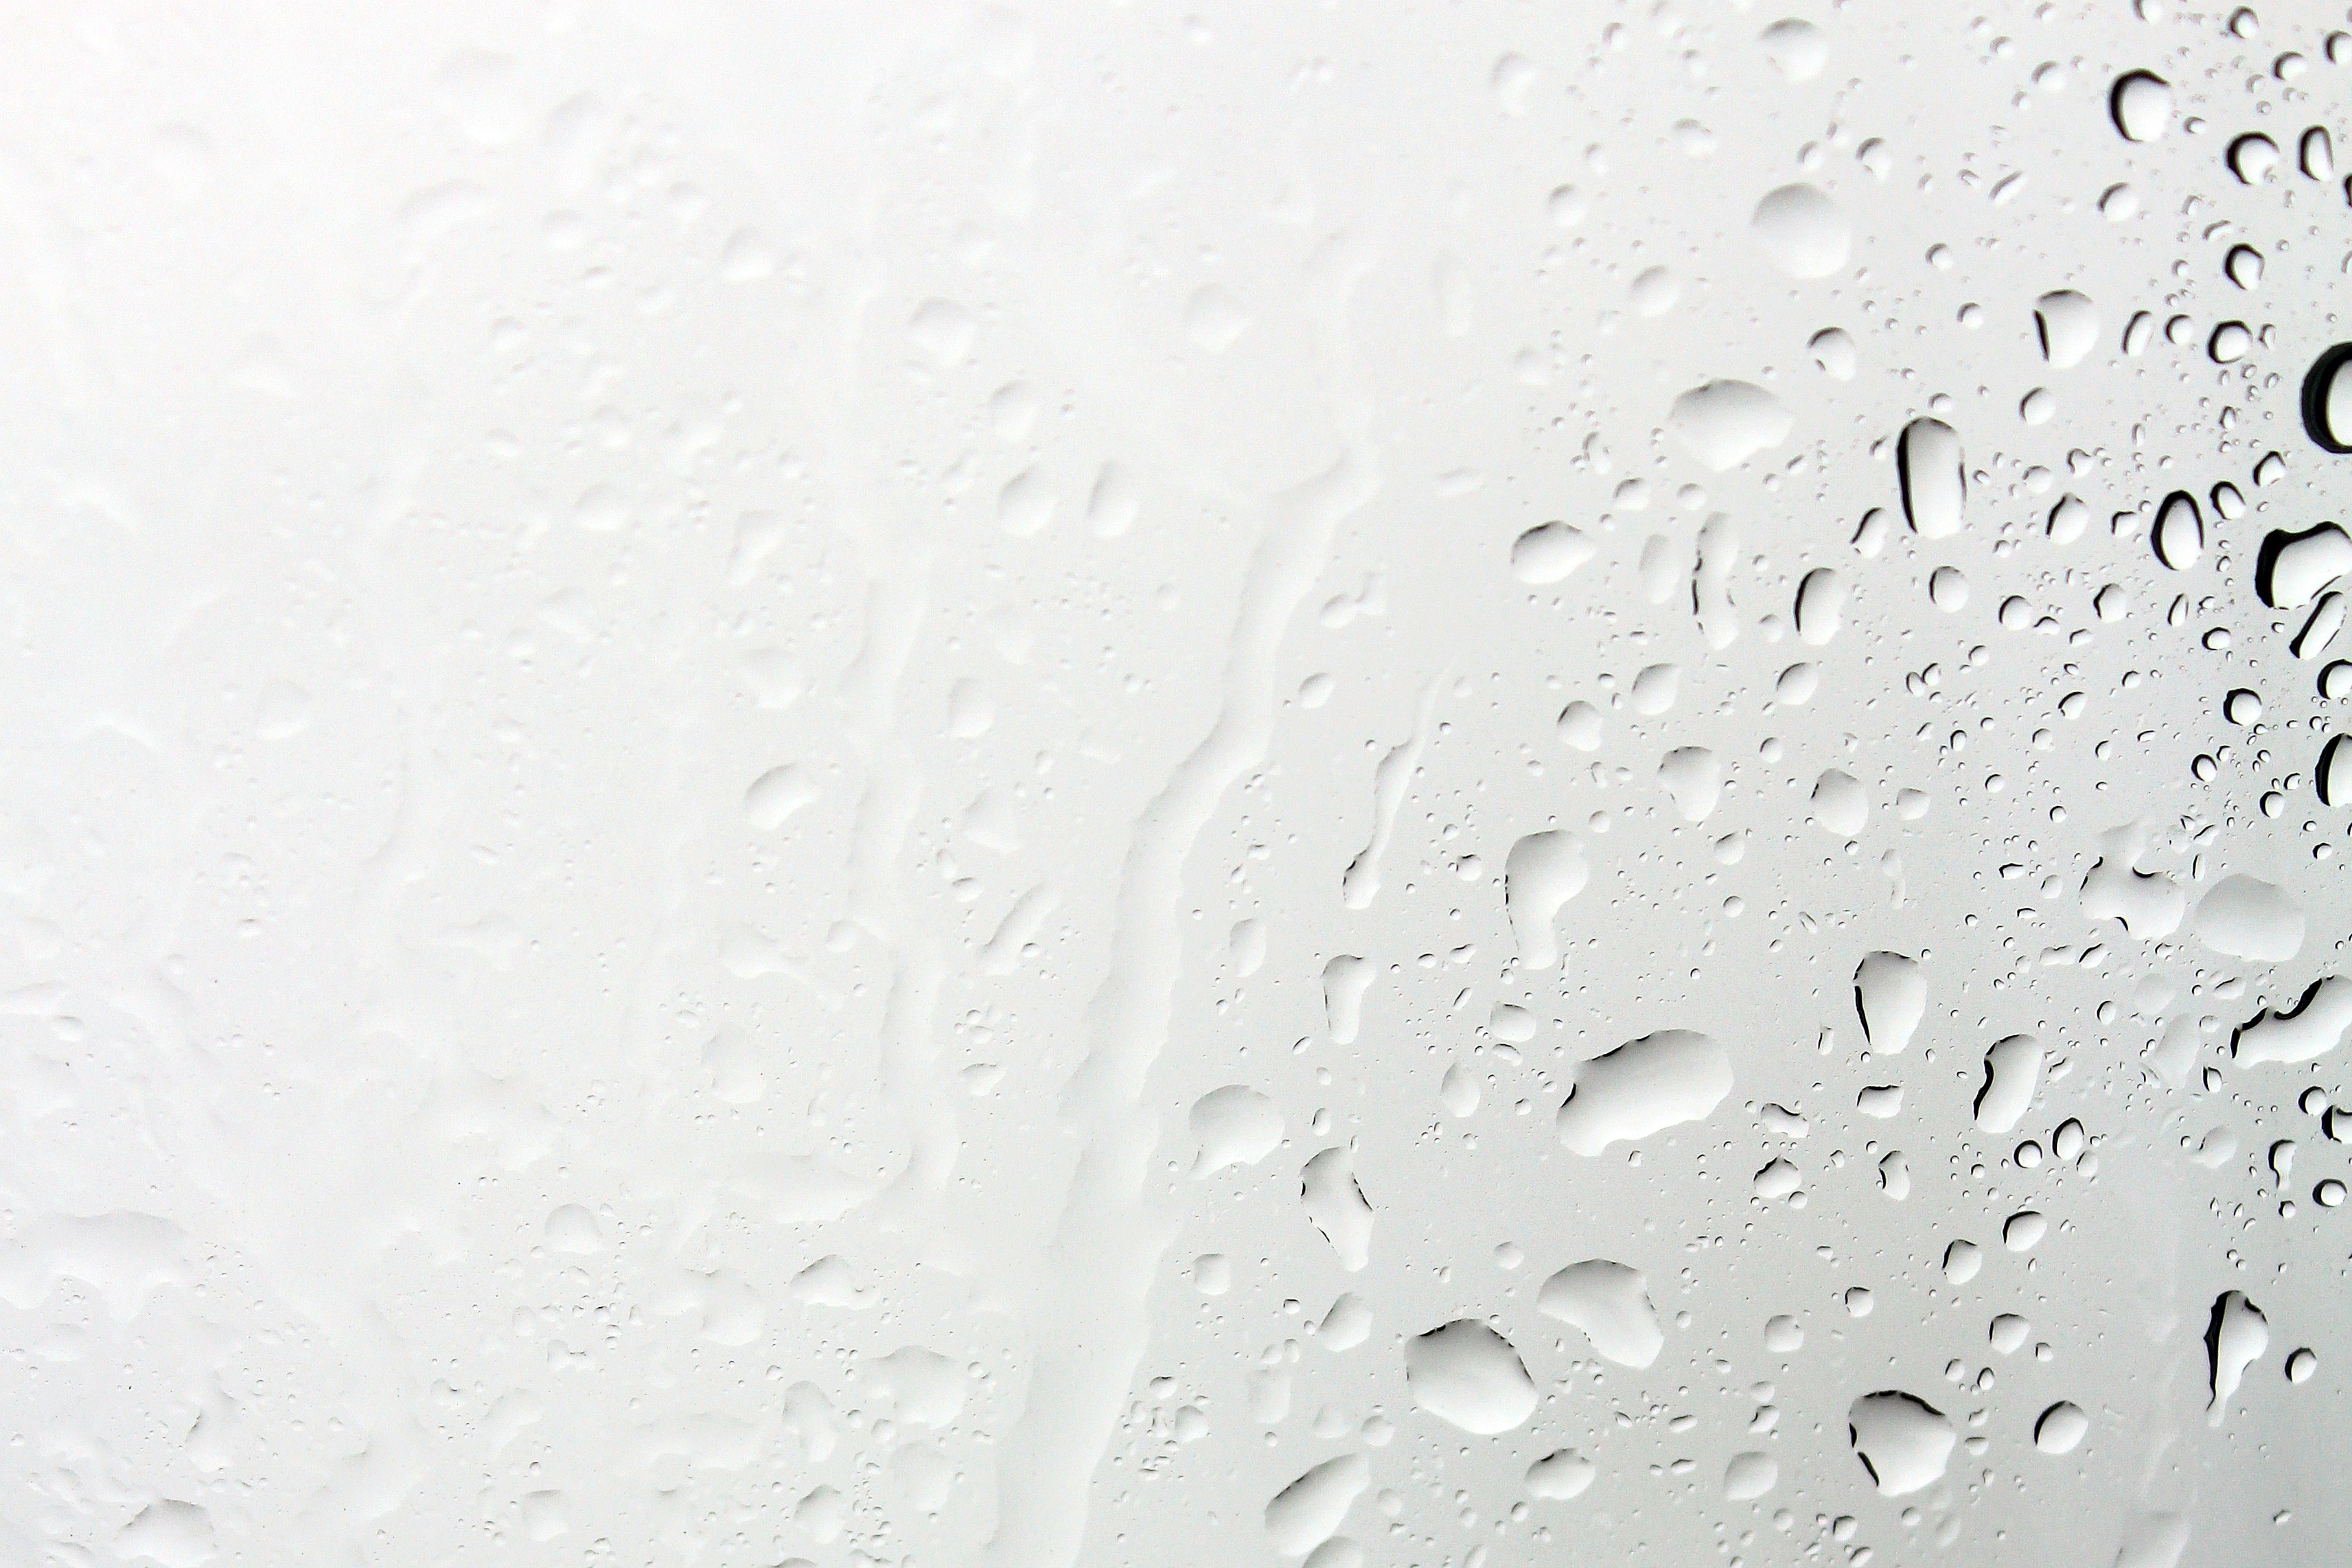 water drops on glass free image | Peakpx